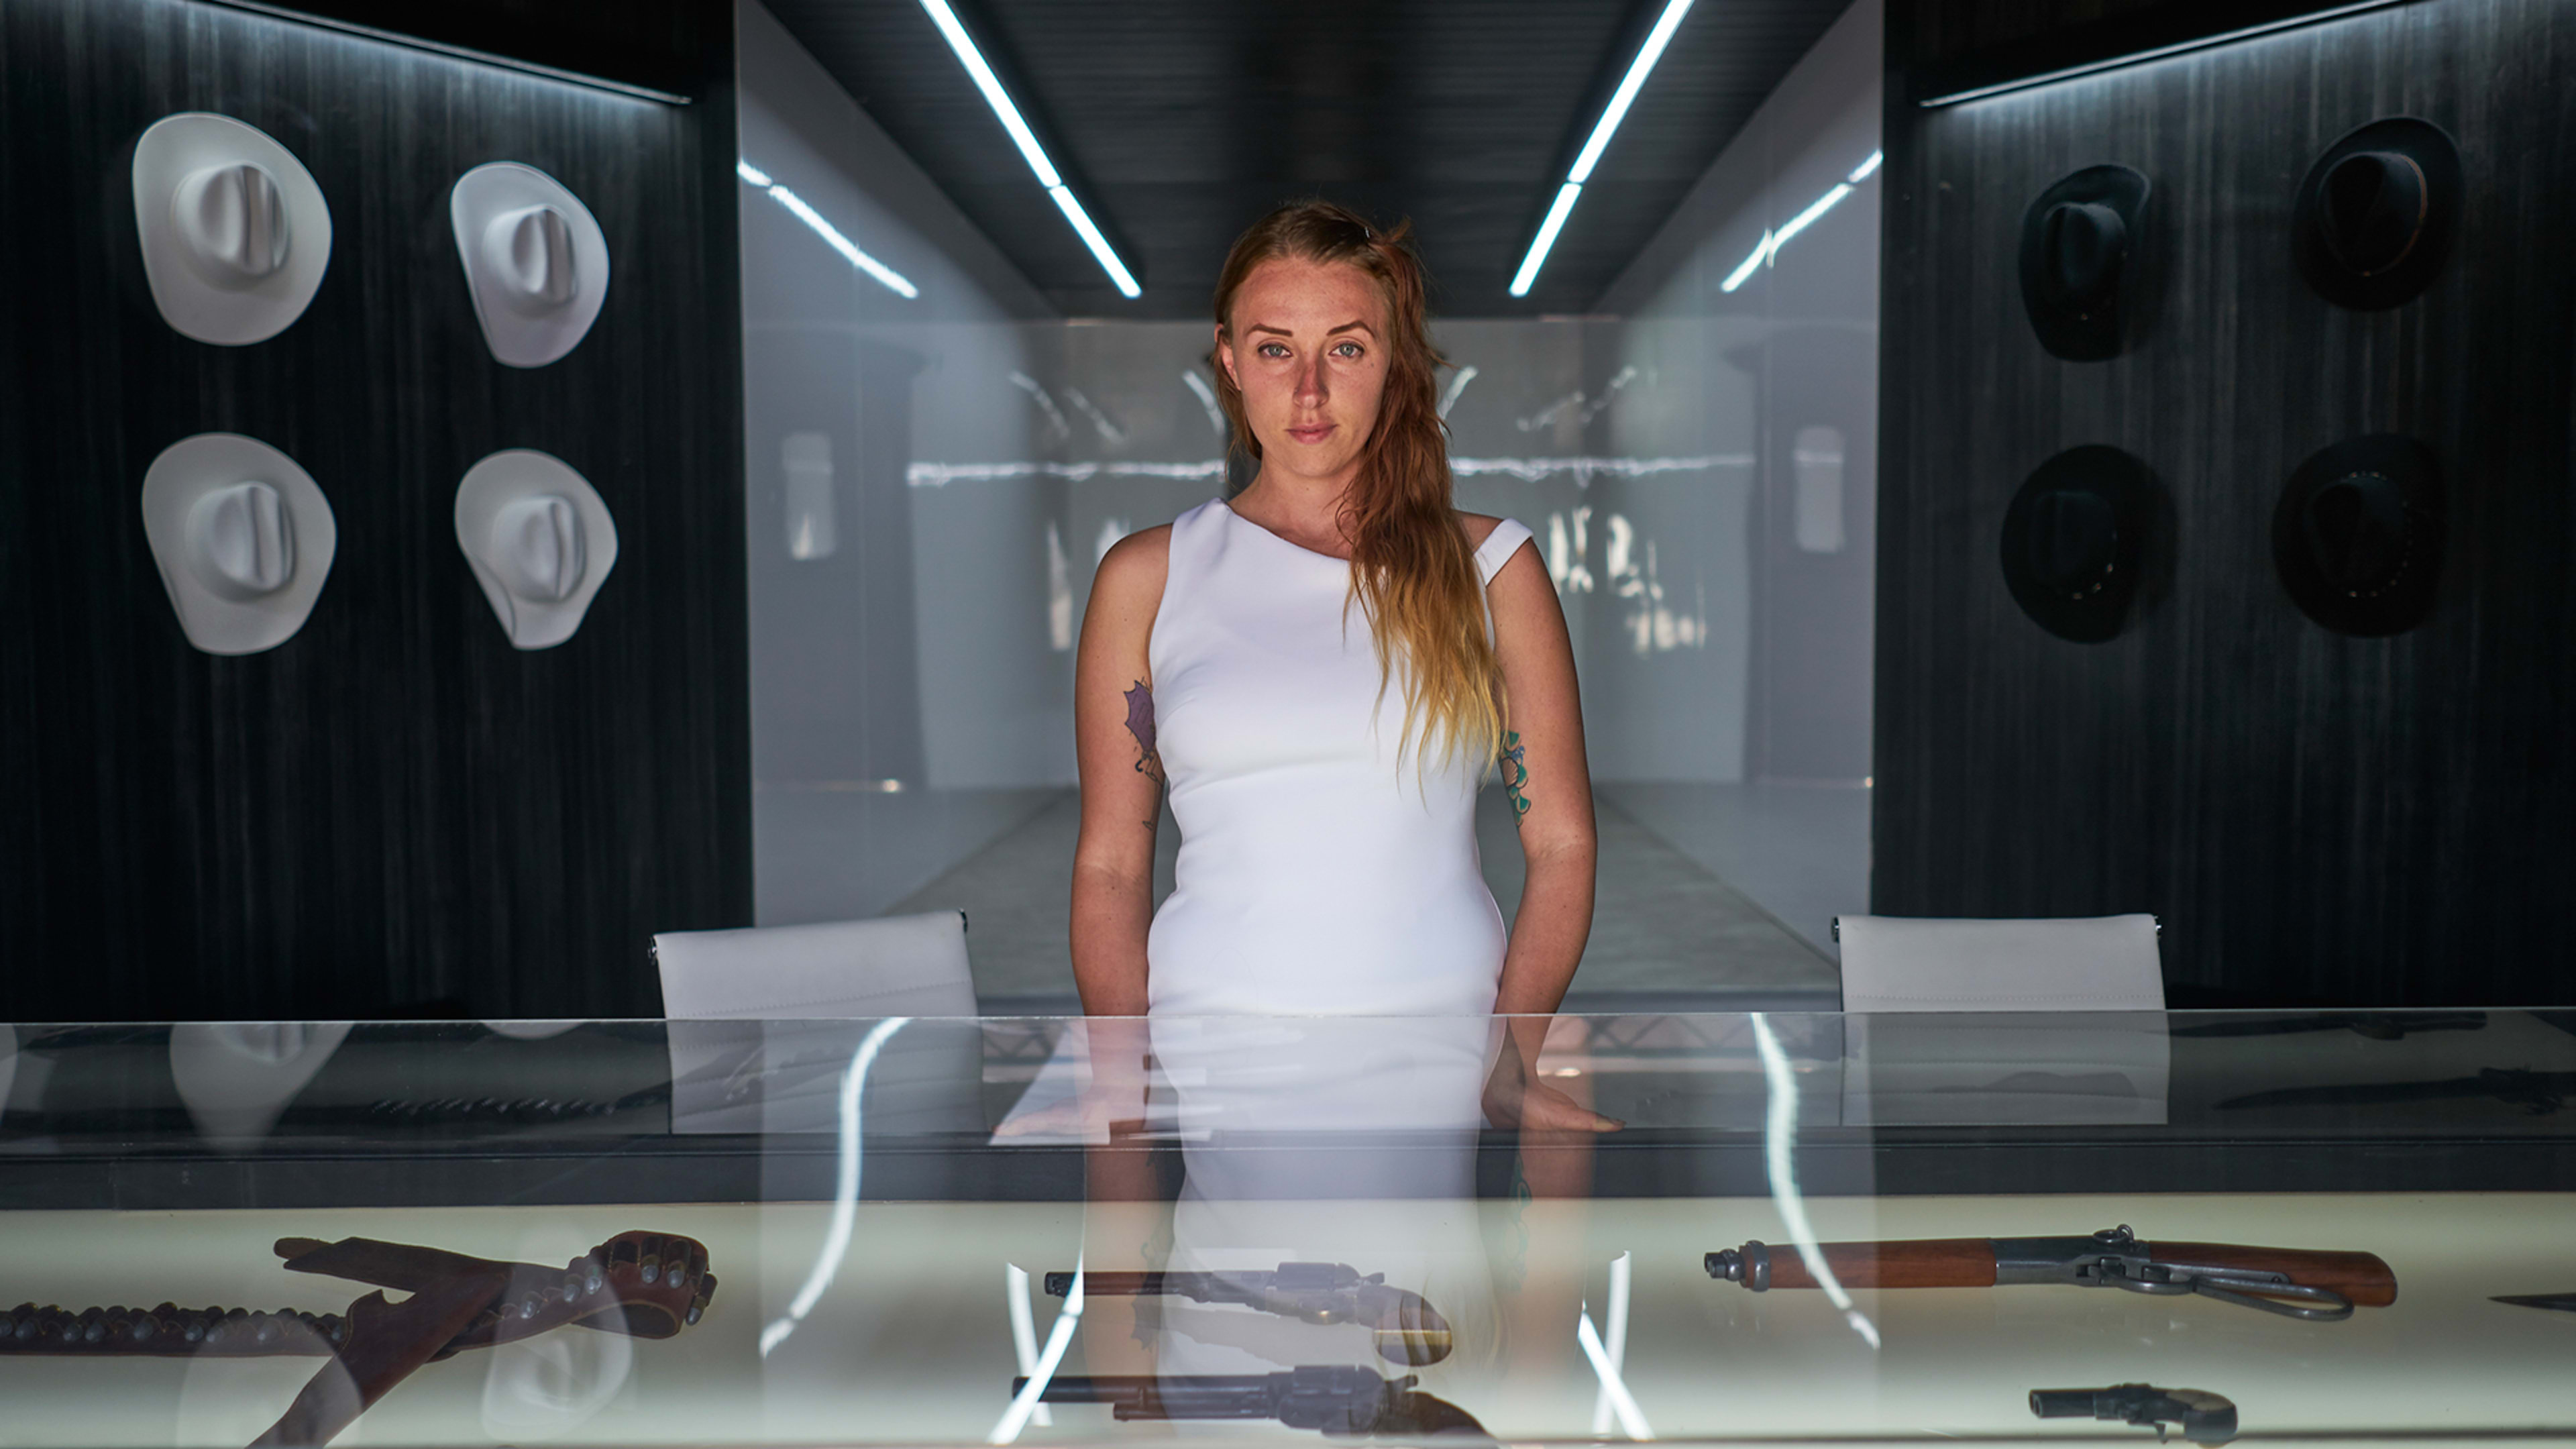 HBO’s “Westworld” Comes To Life At SXSW, And You Can Visit